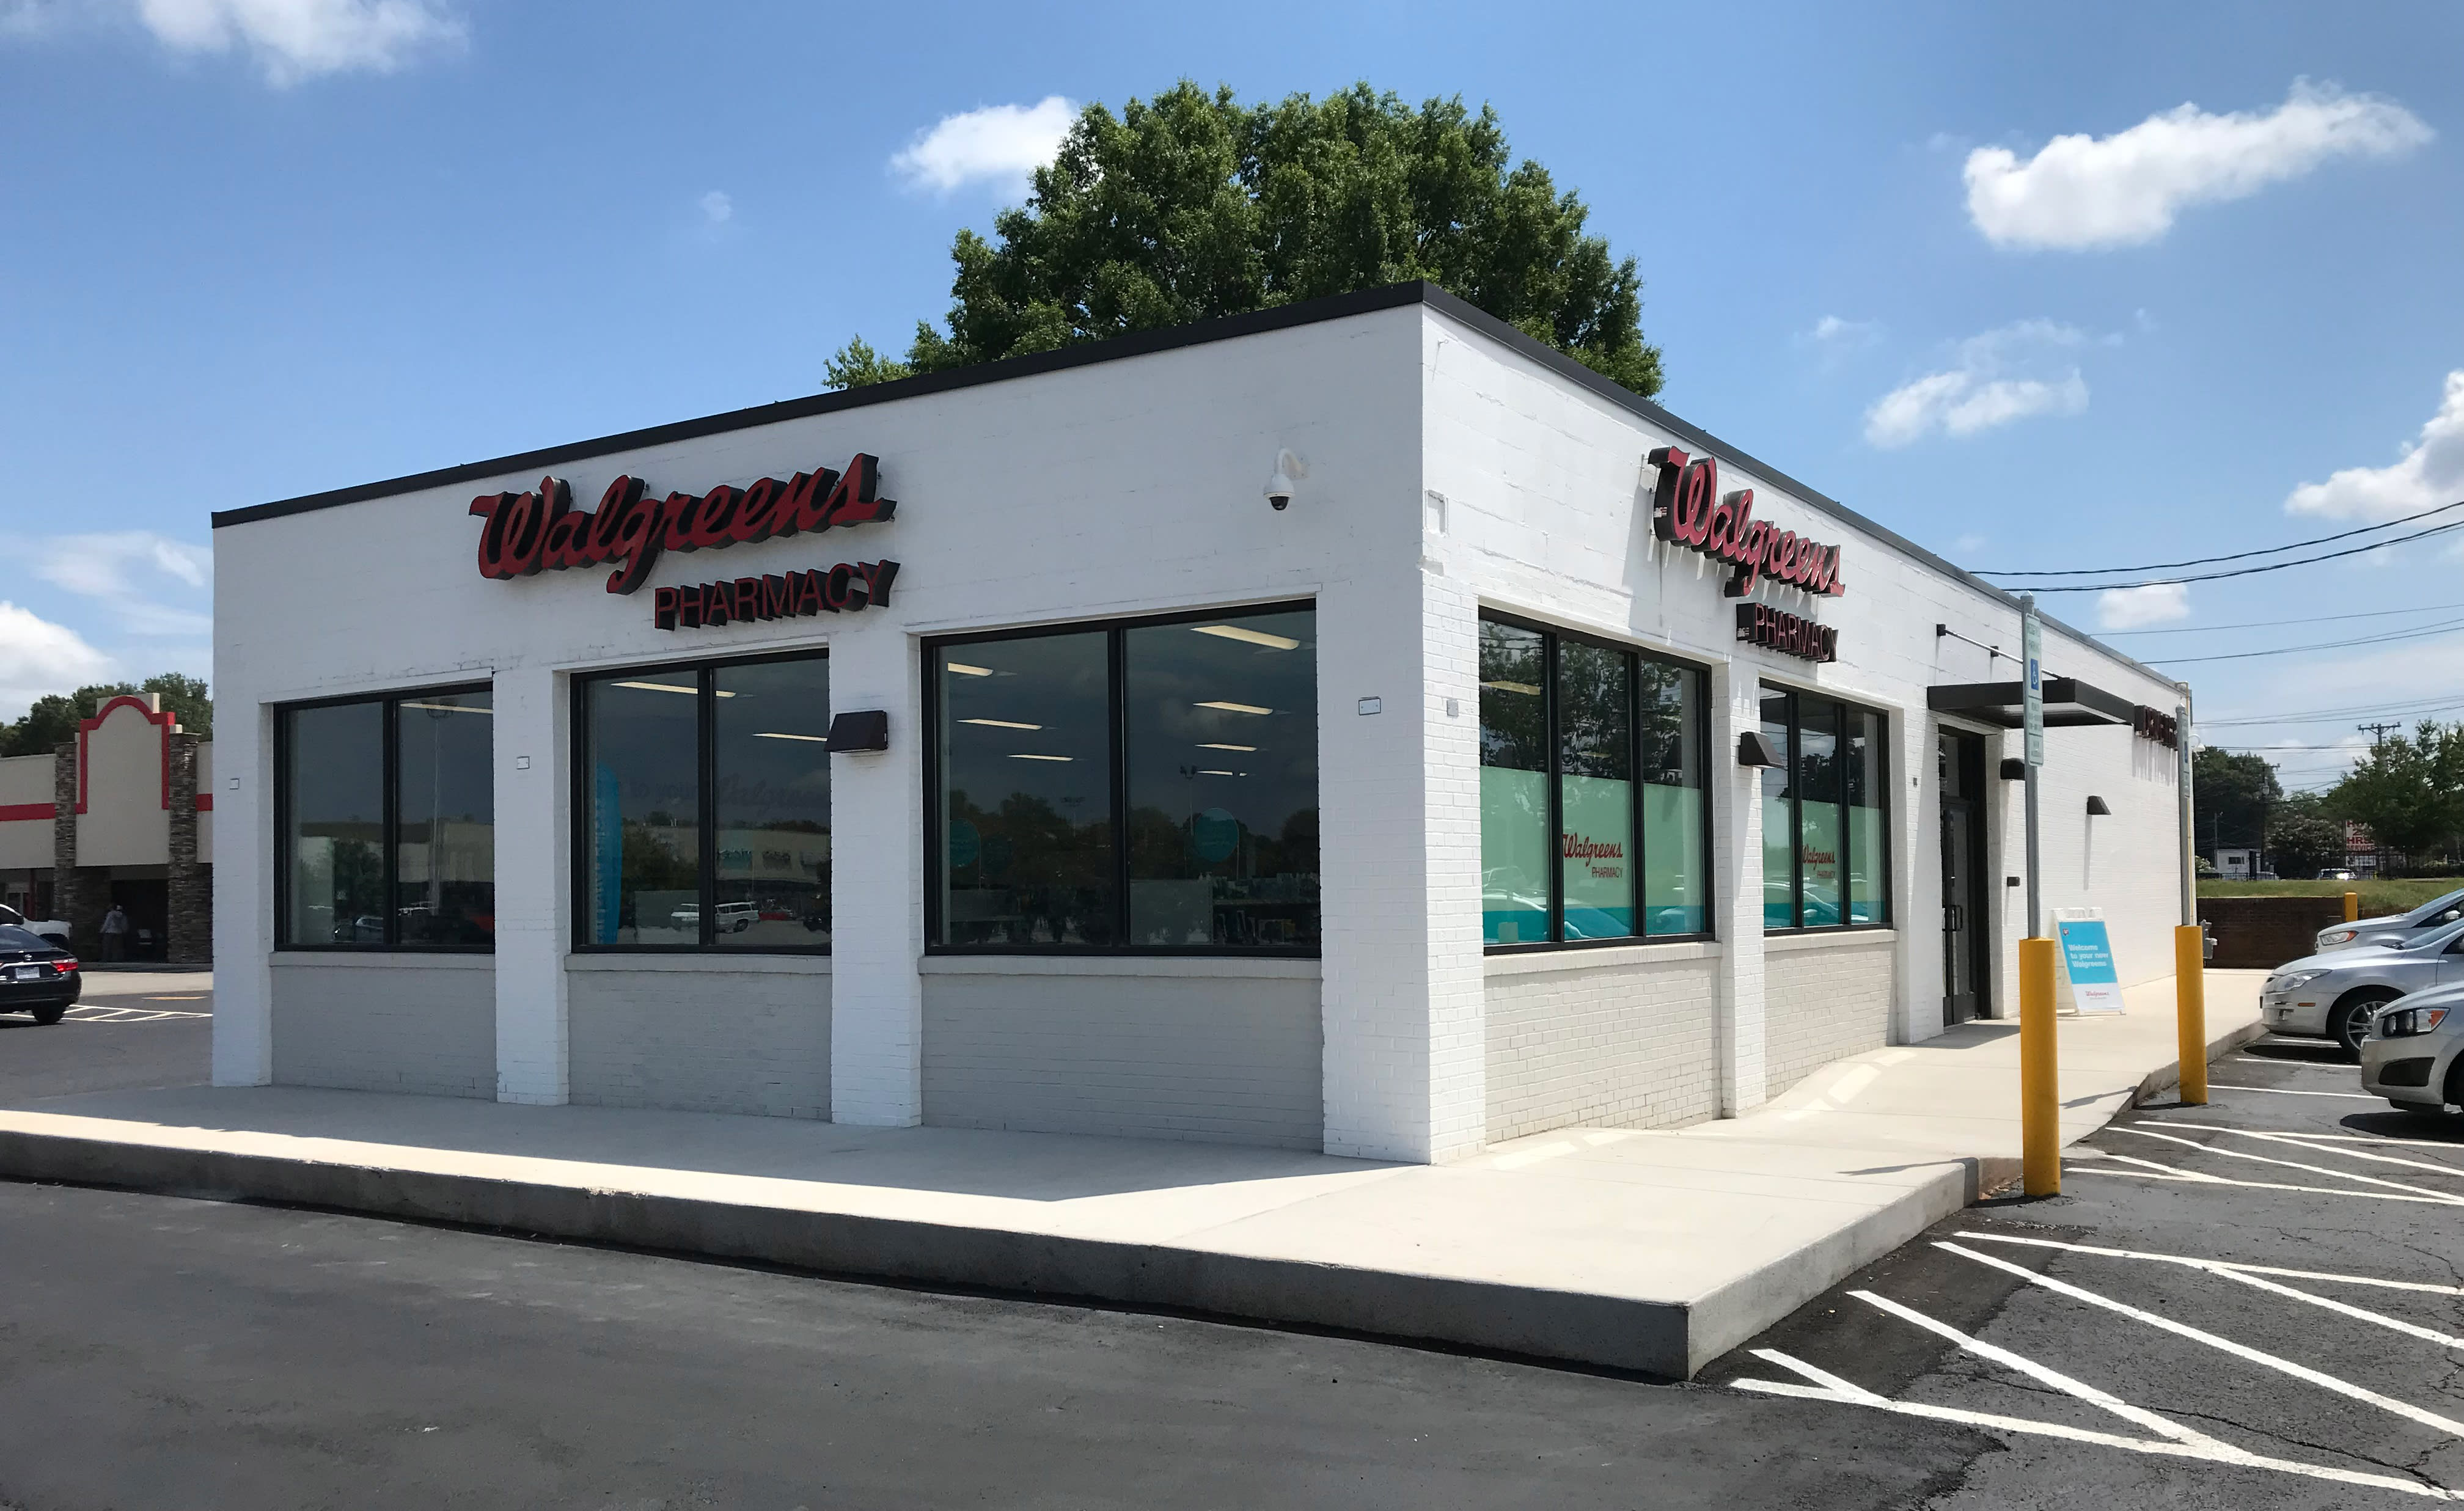 Walgreens says new small-format store personalizes care, could help in 'pharmacy deserts'